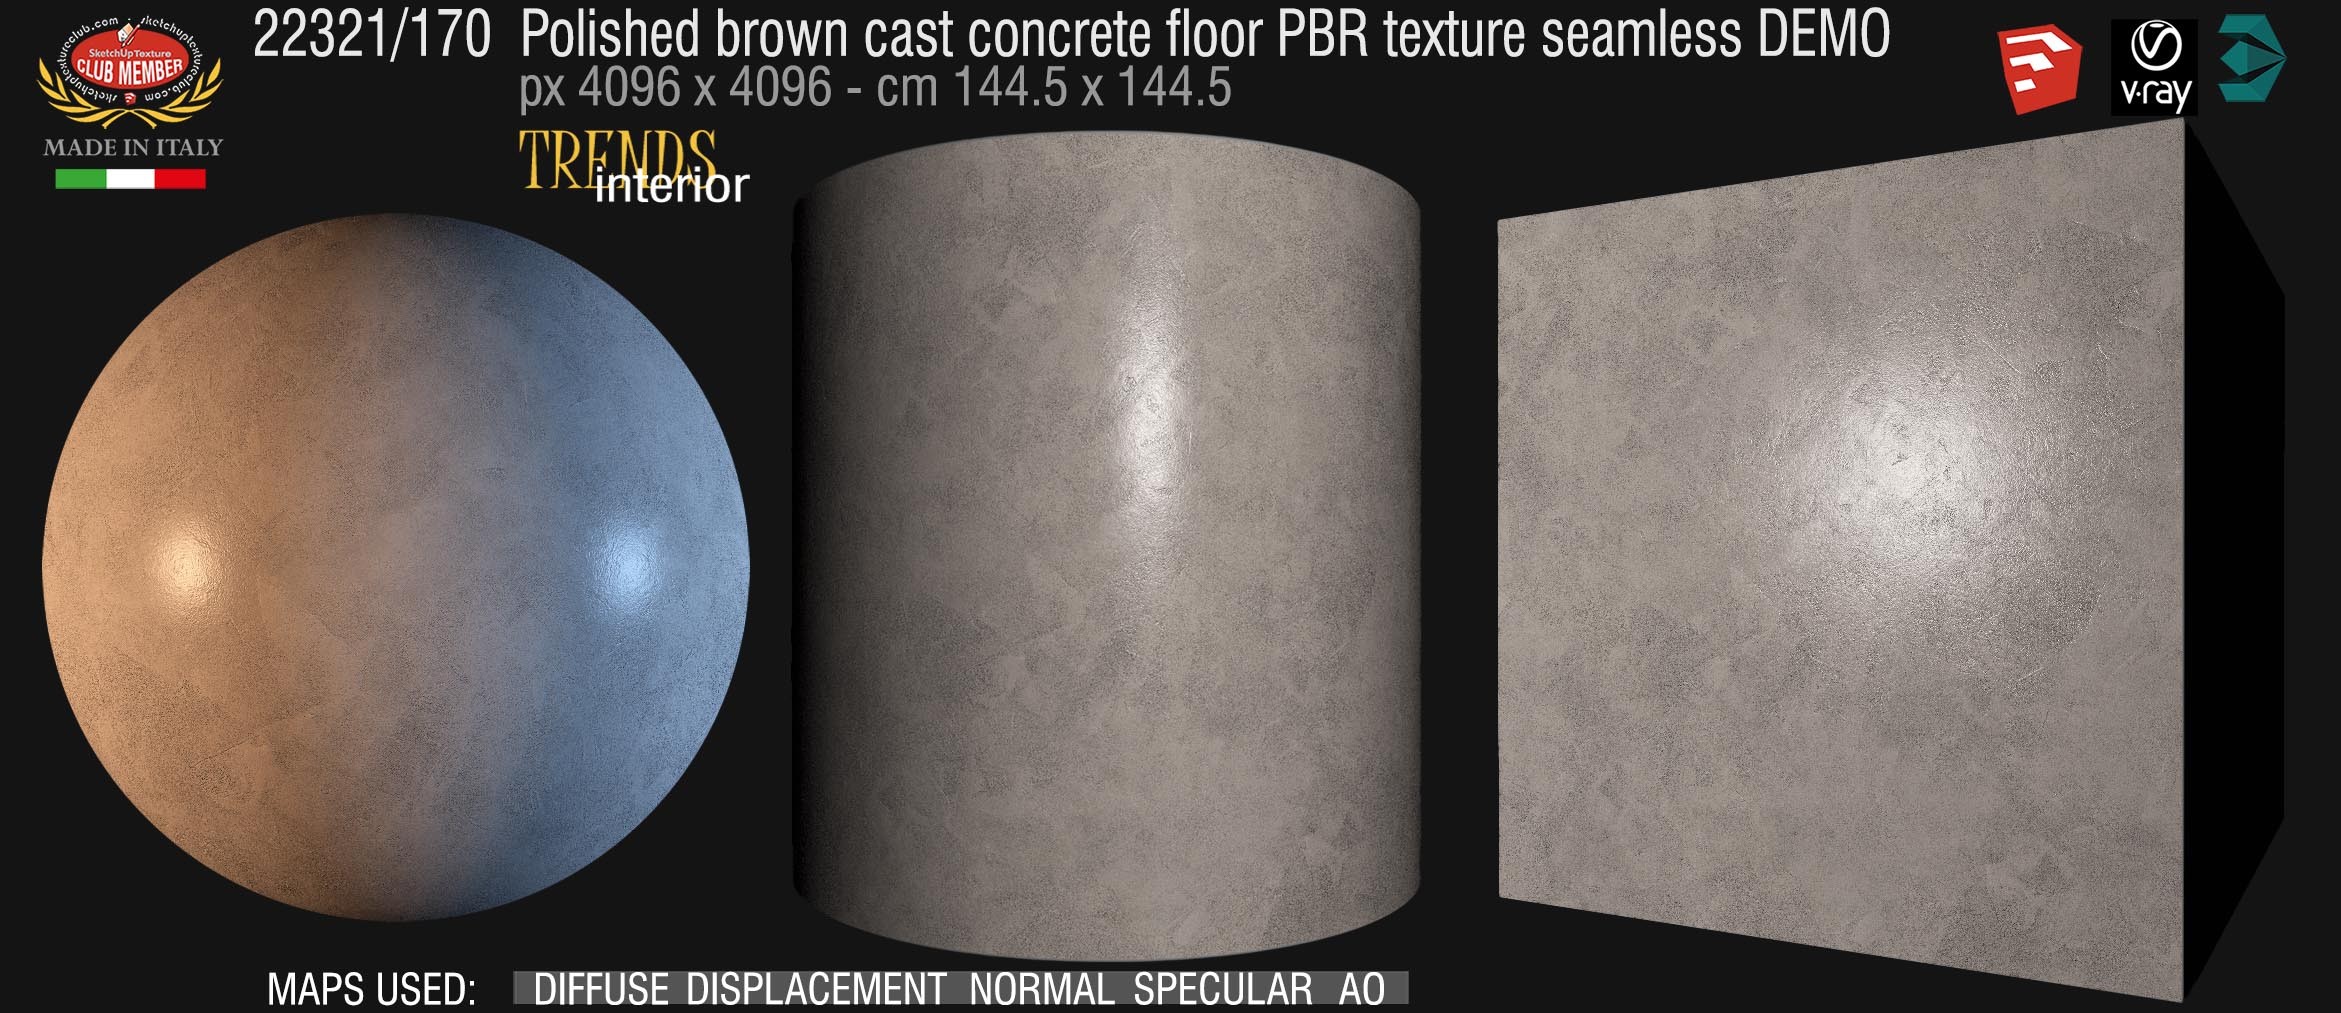 22321_170 Polished brown cast concrete floor PBR texture seamless DEMO